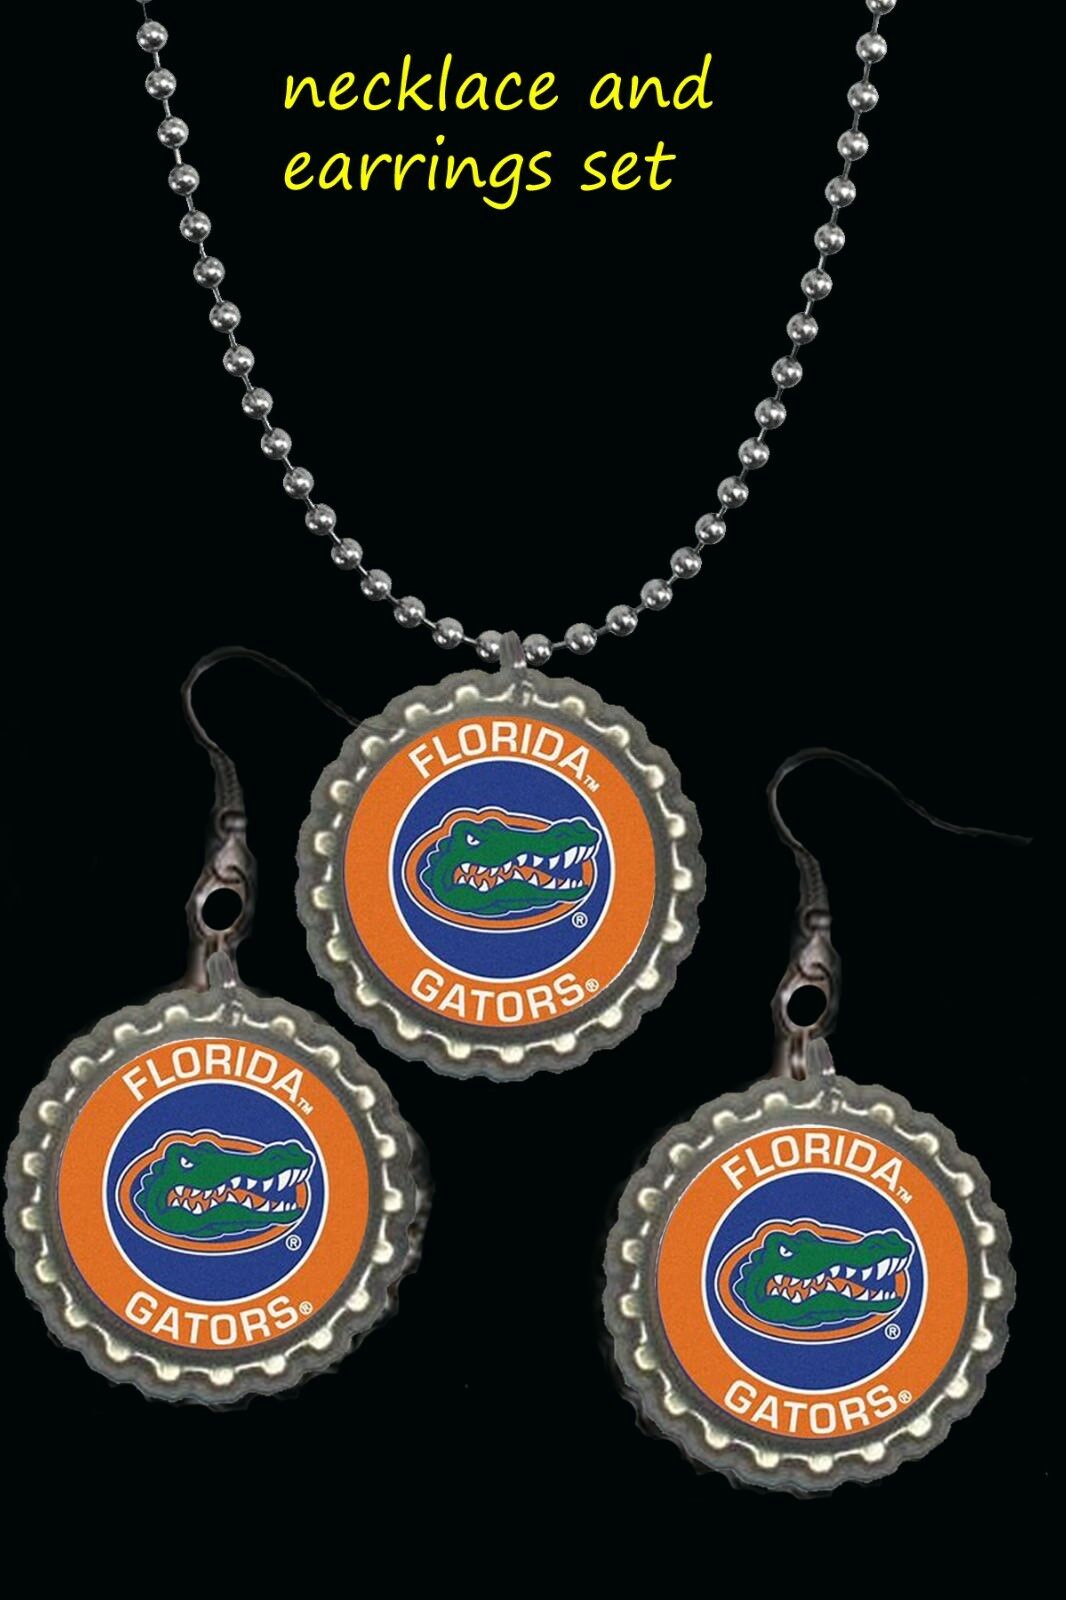 Florida Gators earrings earring and necklace set great  must have